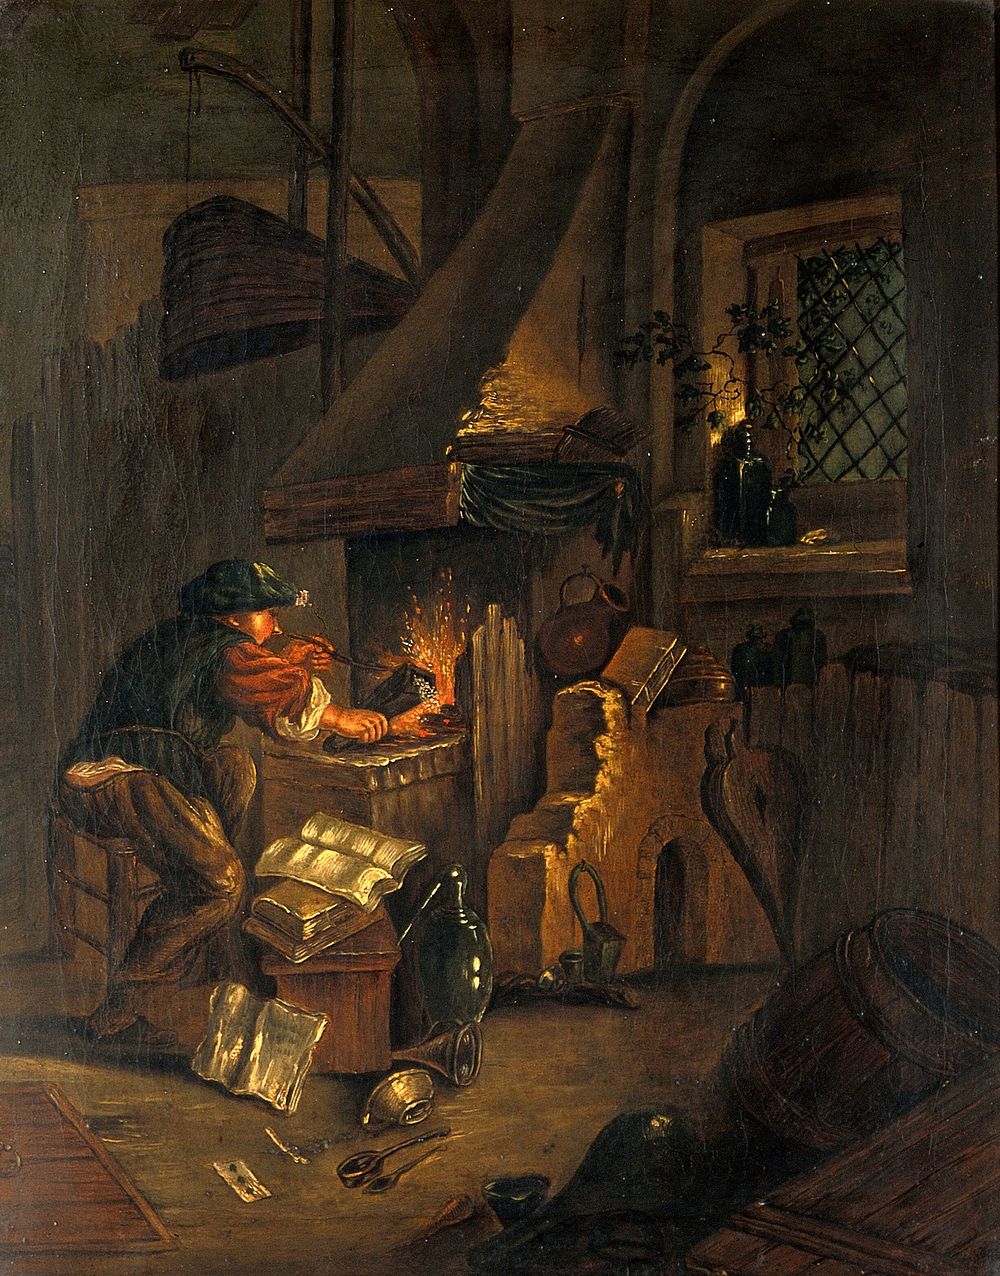 An alchemist in his laboratory. Oil painting by or after Thomas Wijck (Thomas Wyck).